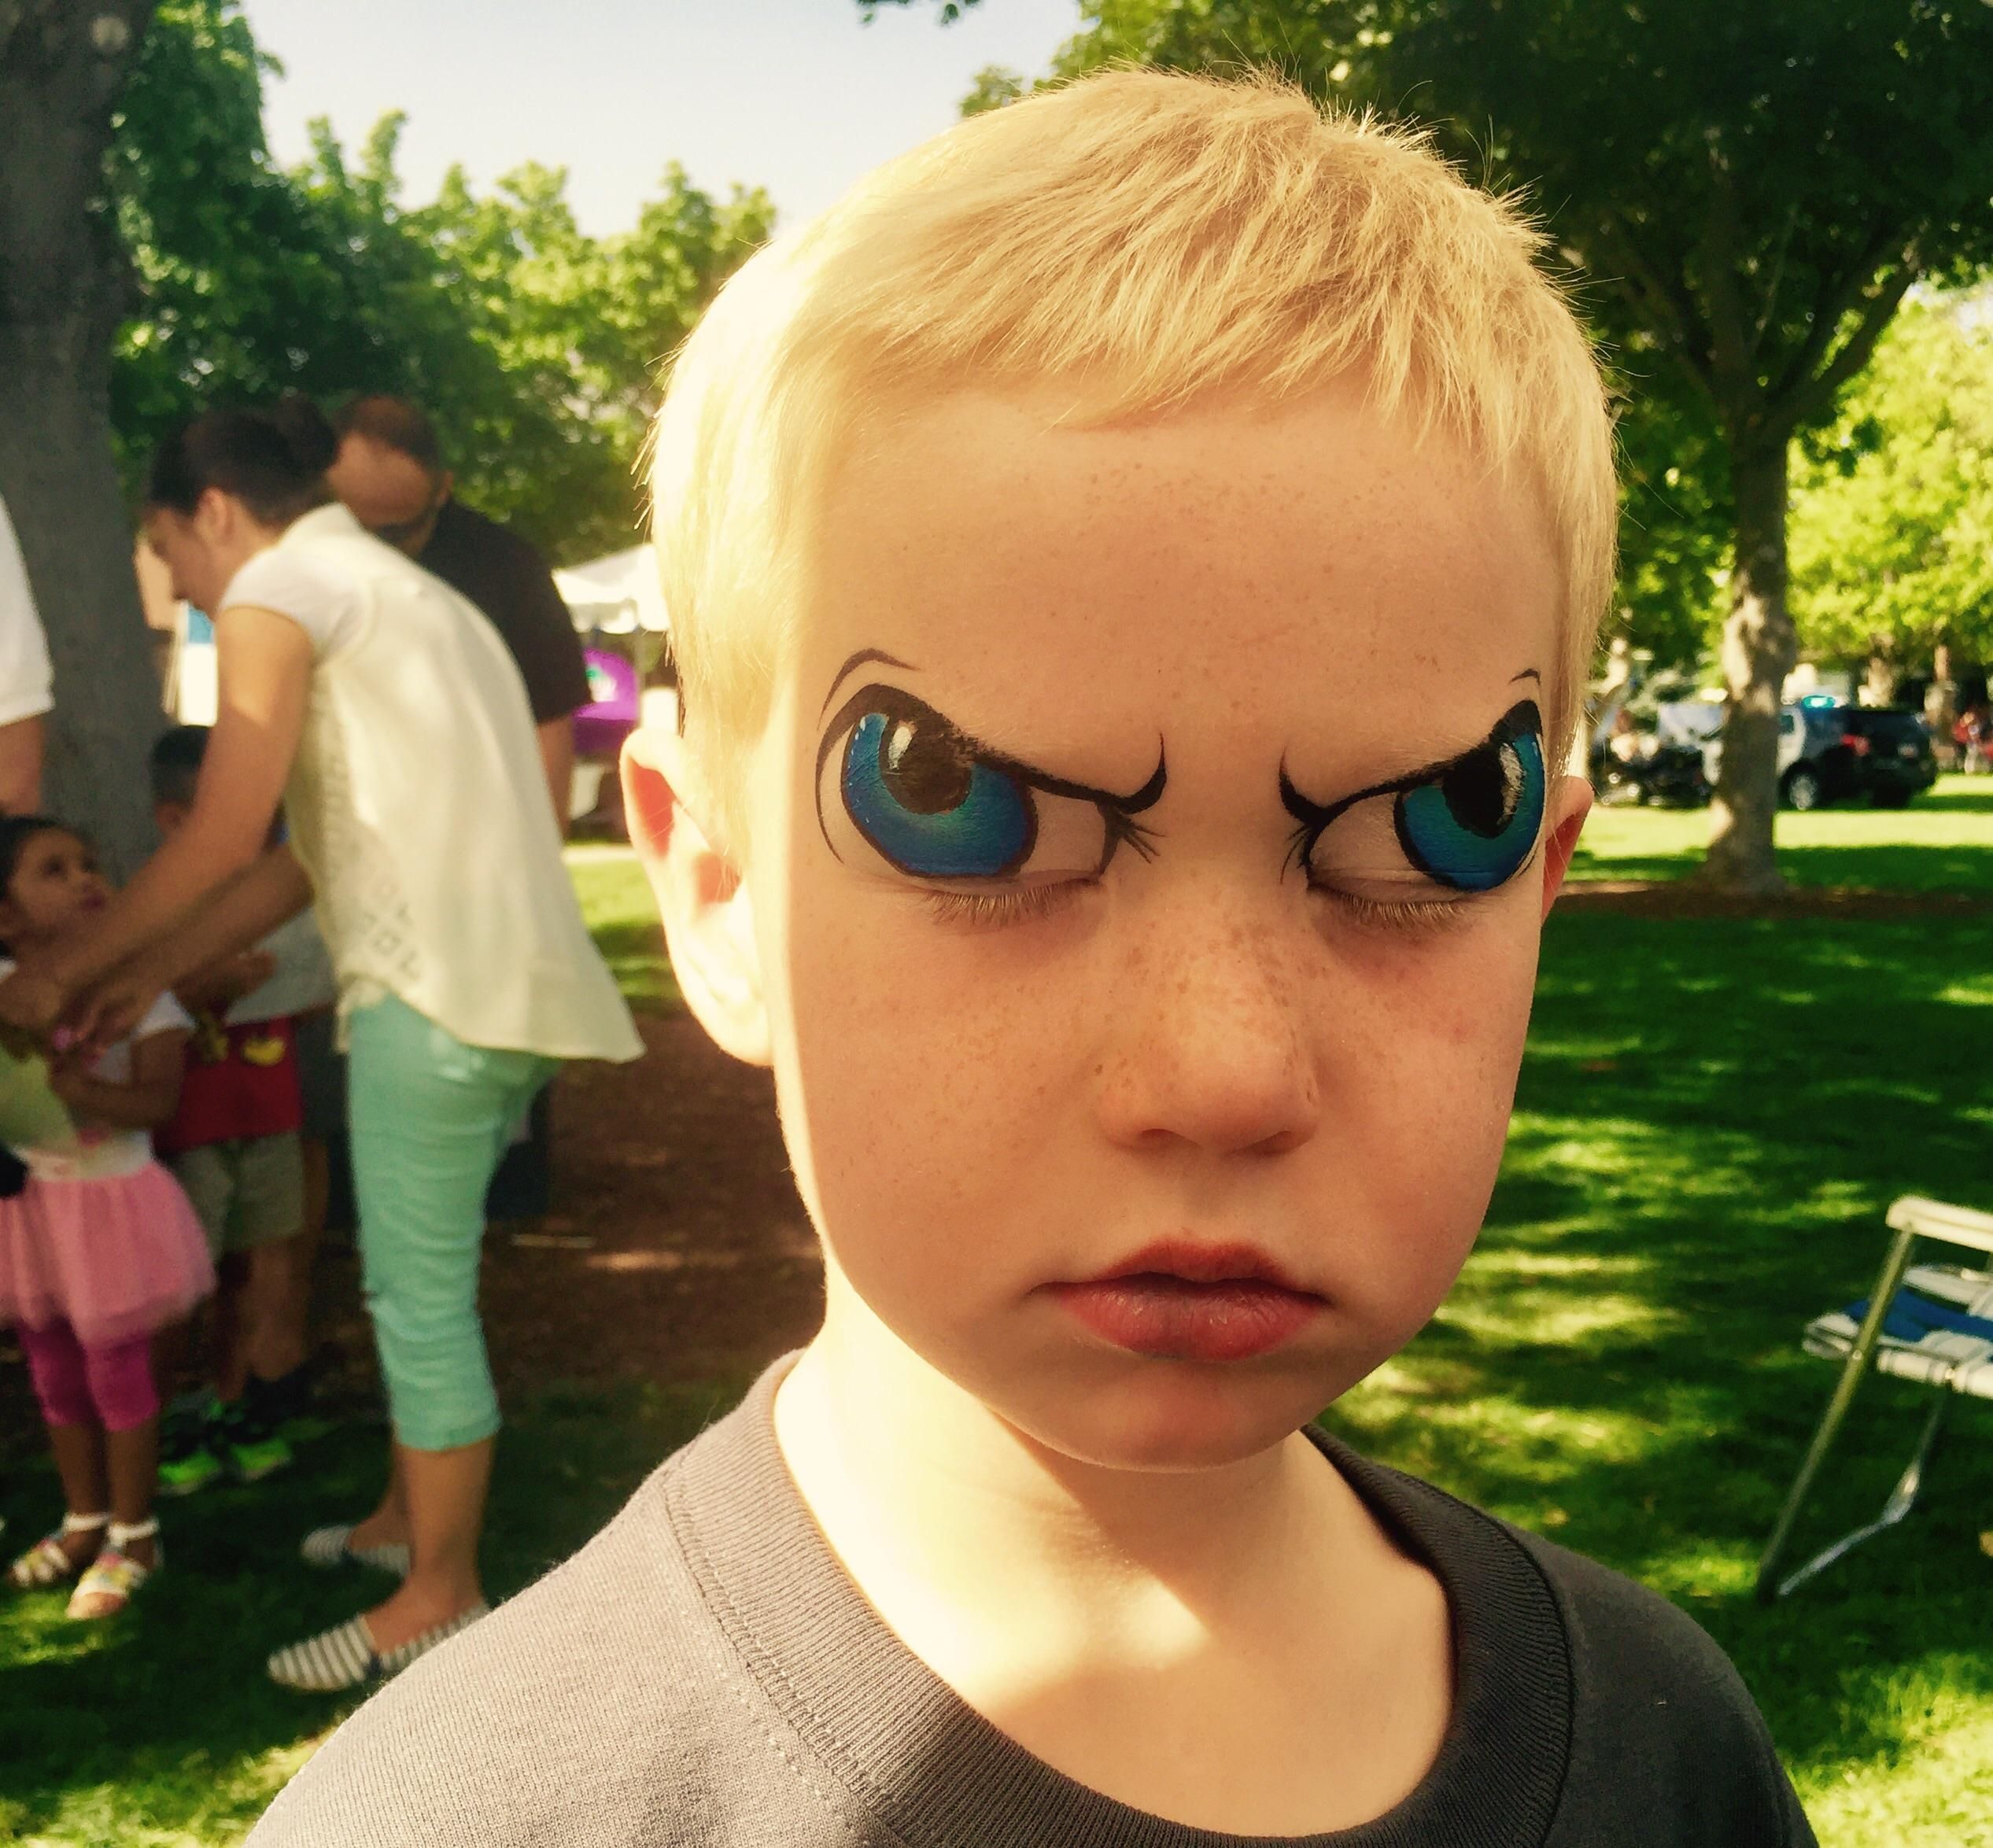 Face painting gone horribly wrong.